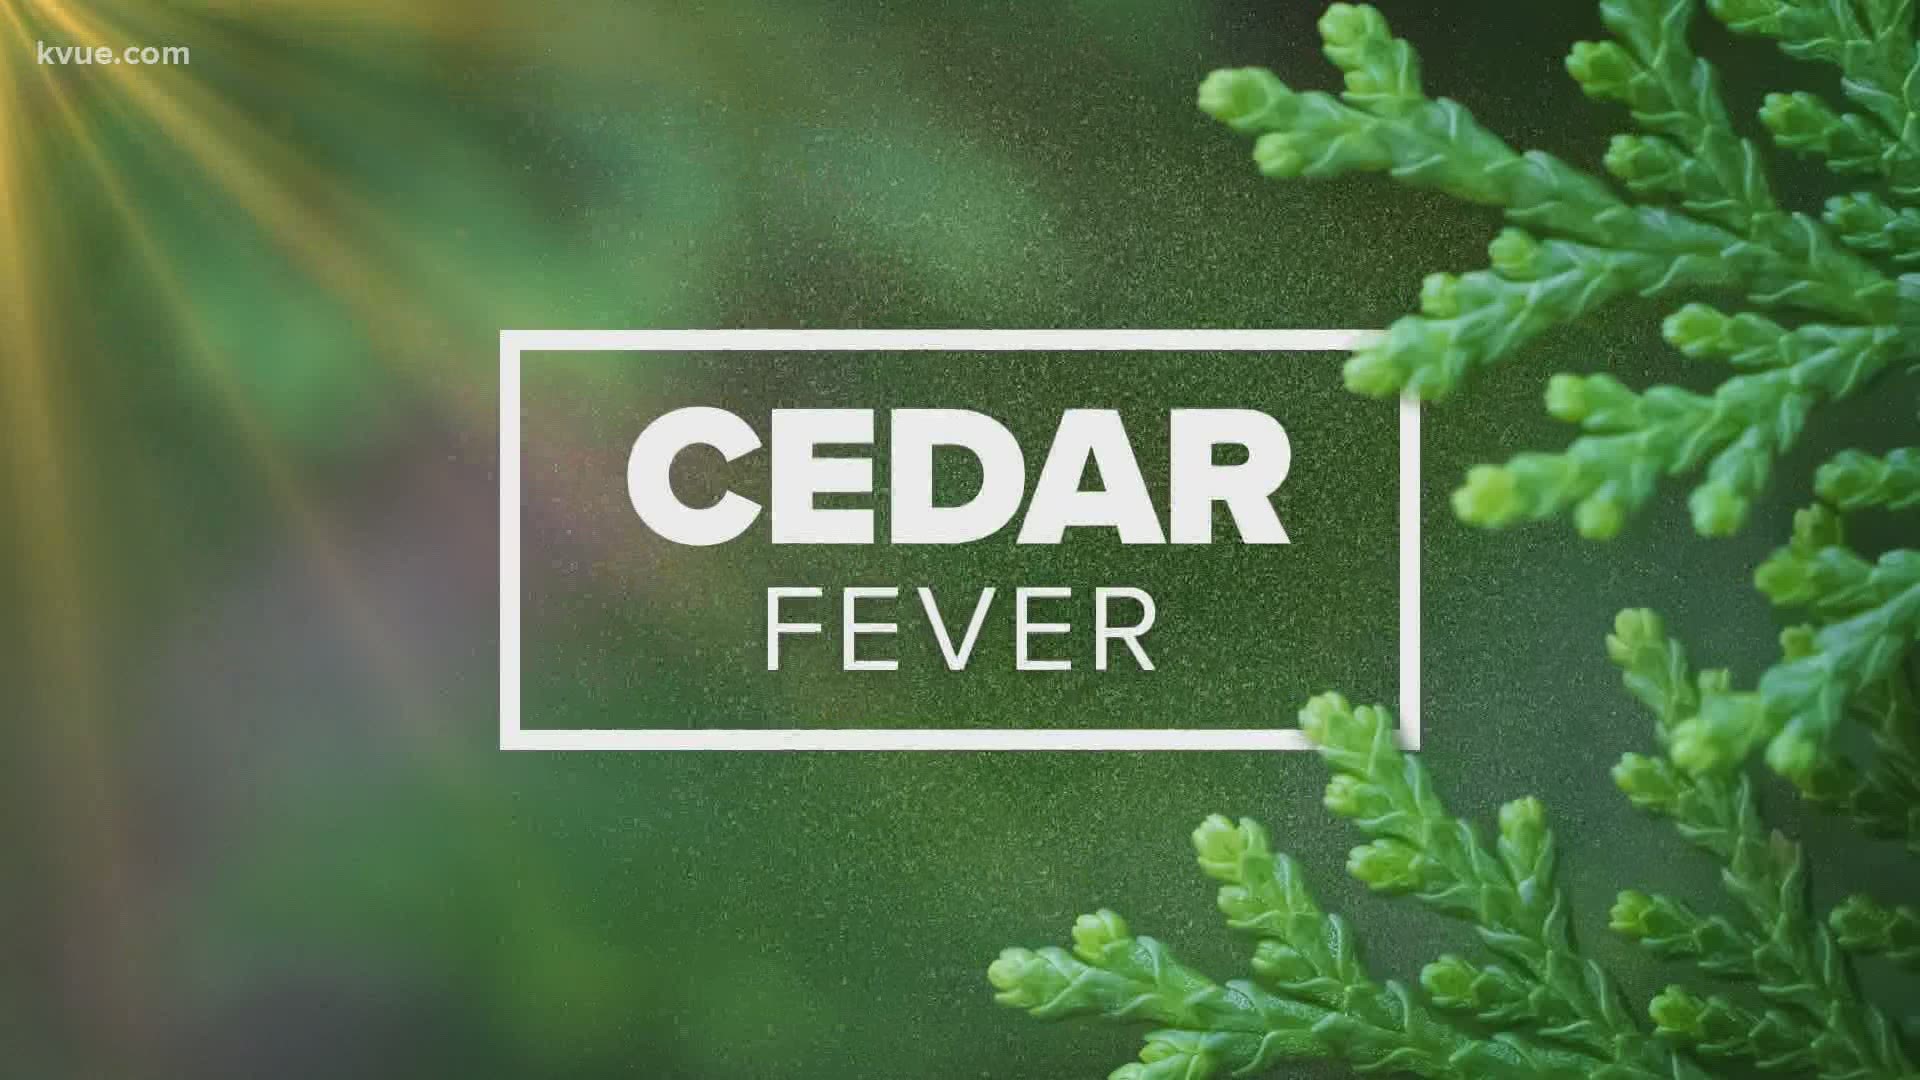 Cedar fever, the flu or COVID19? Explaining the differences in